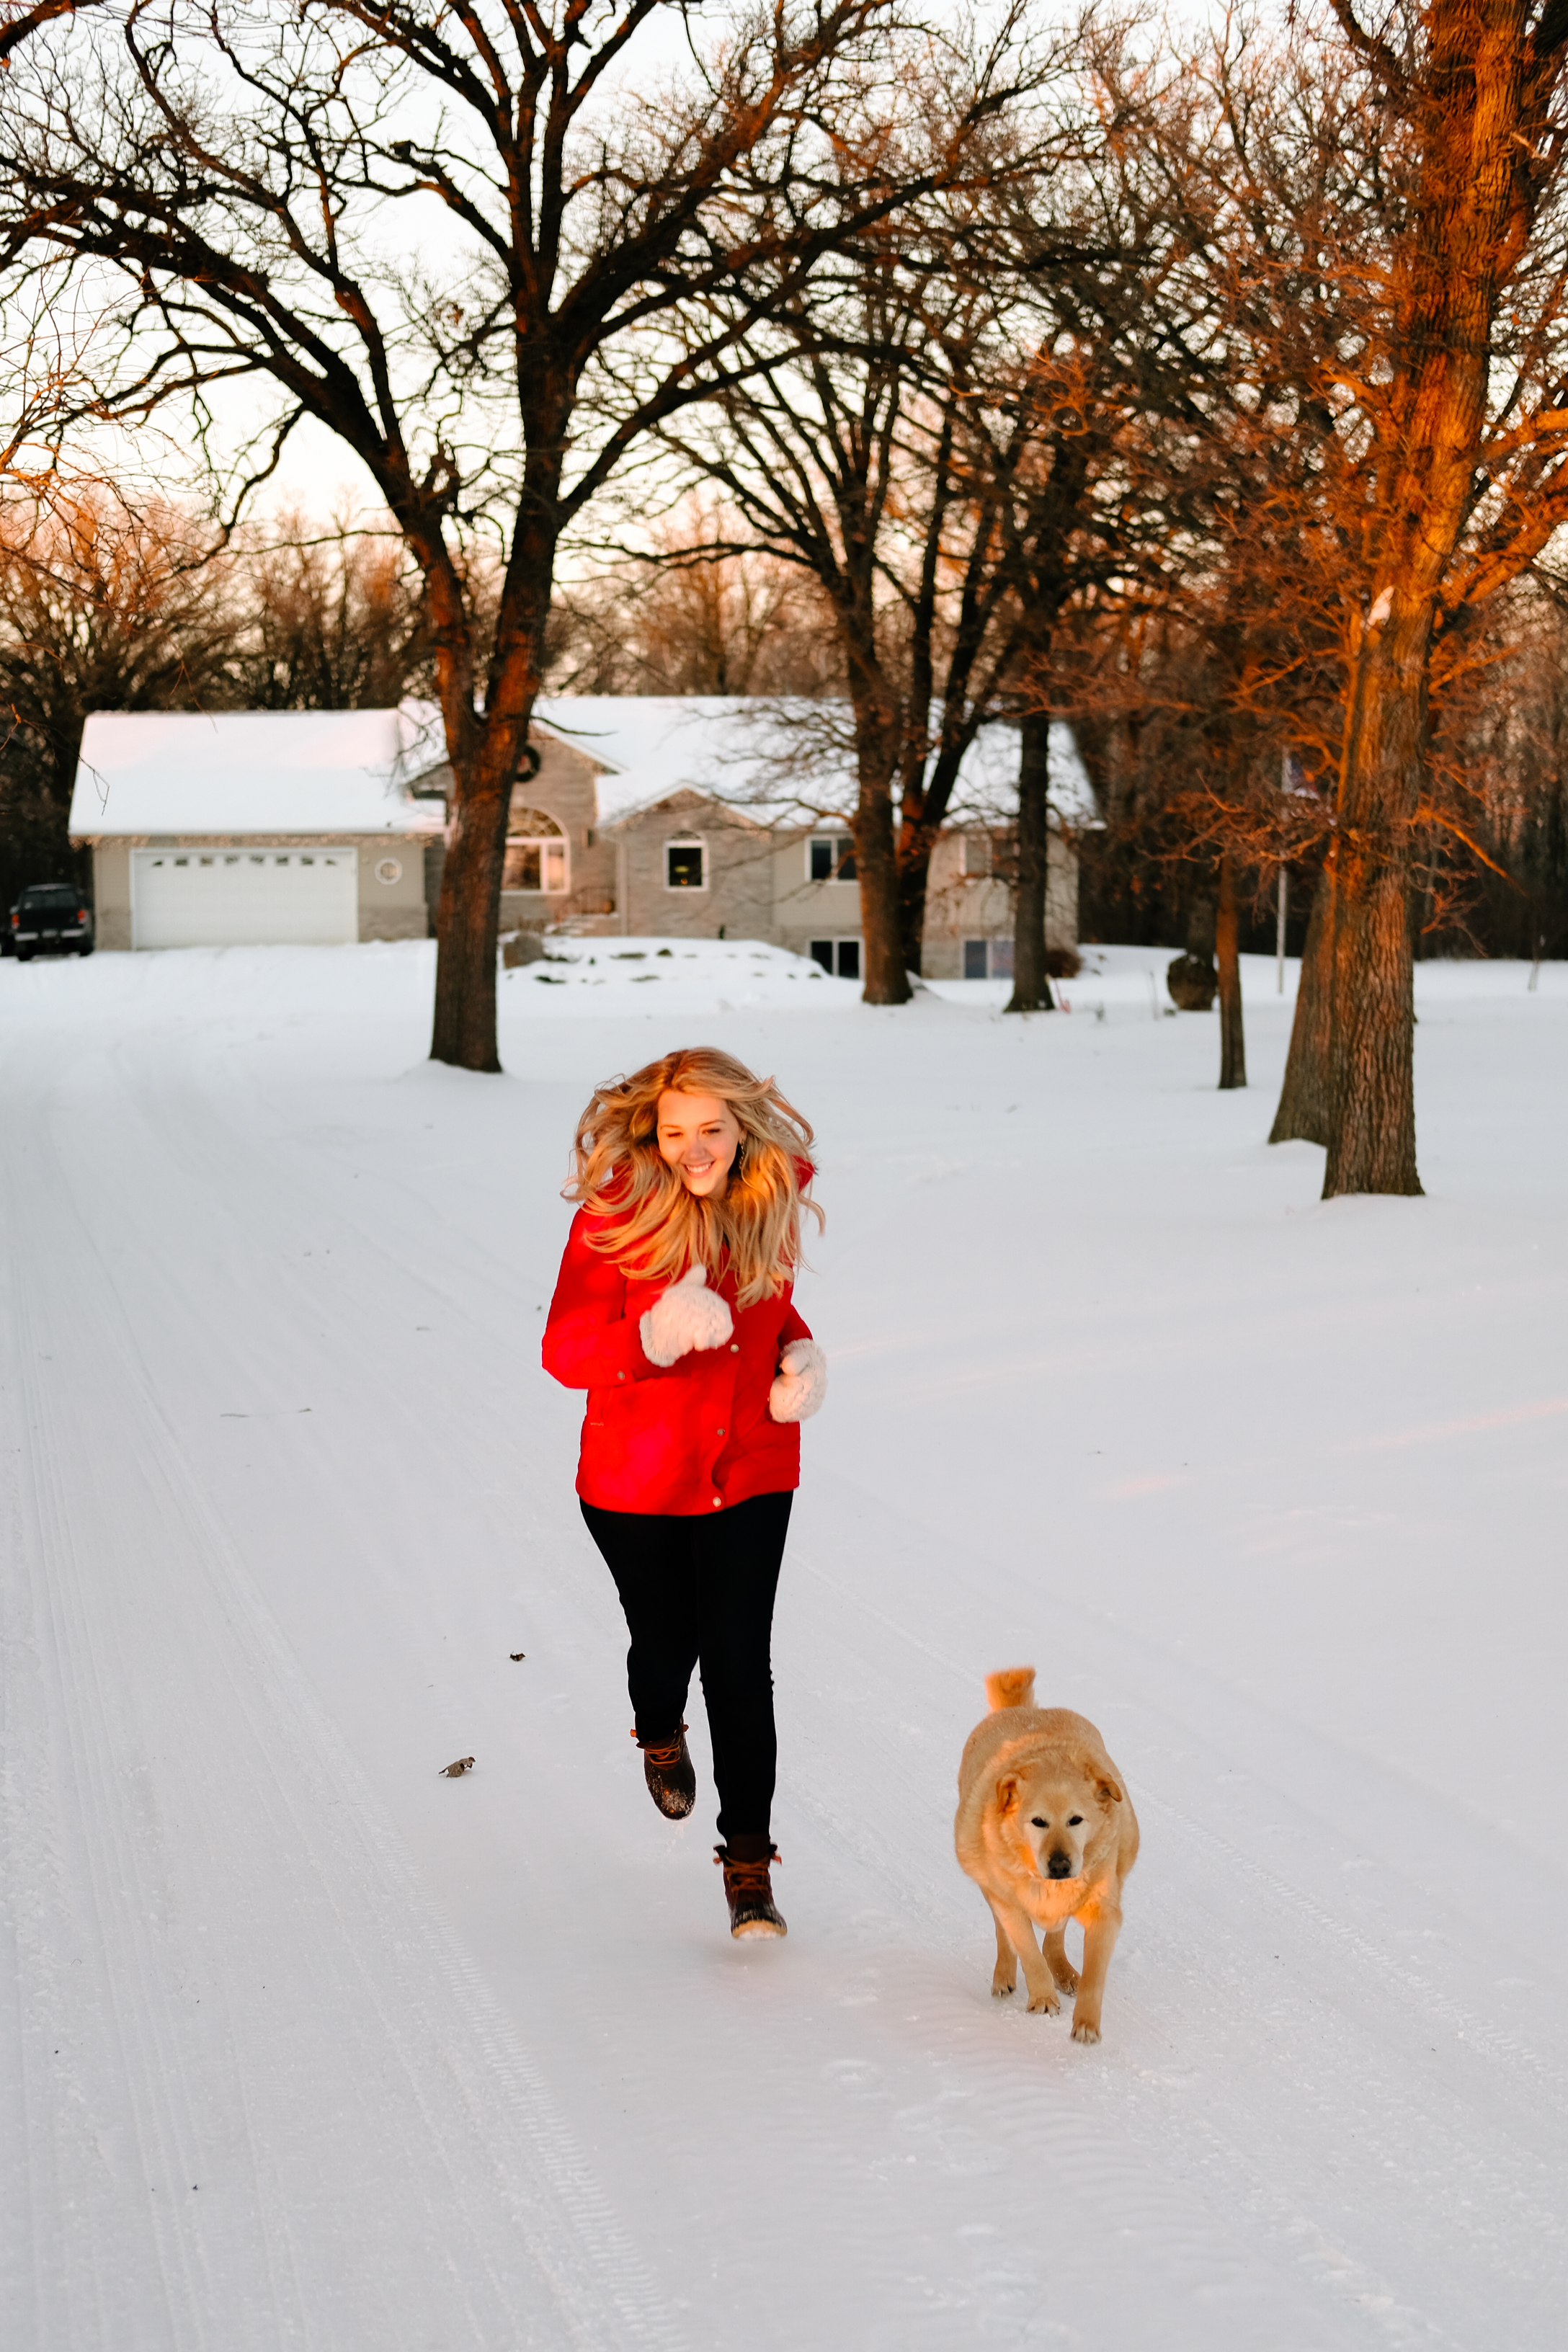 Debora Dahl running in the snow with a dog